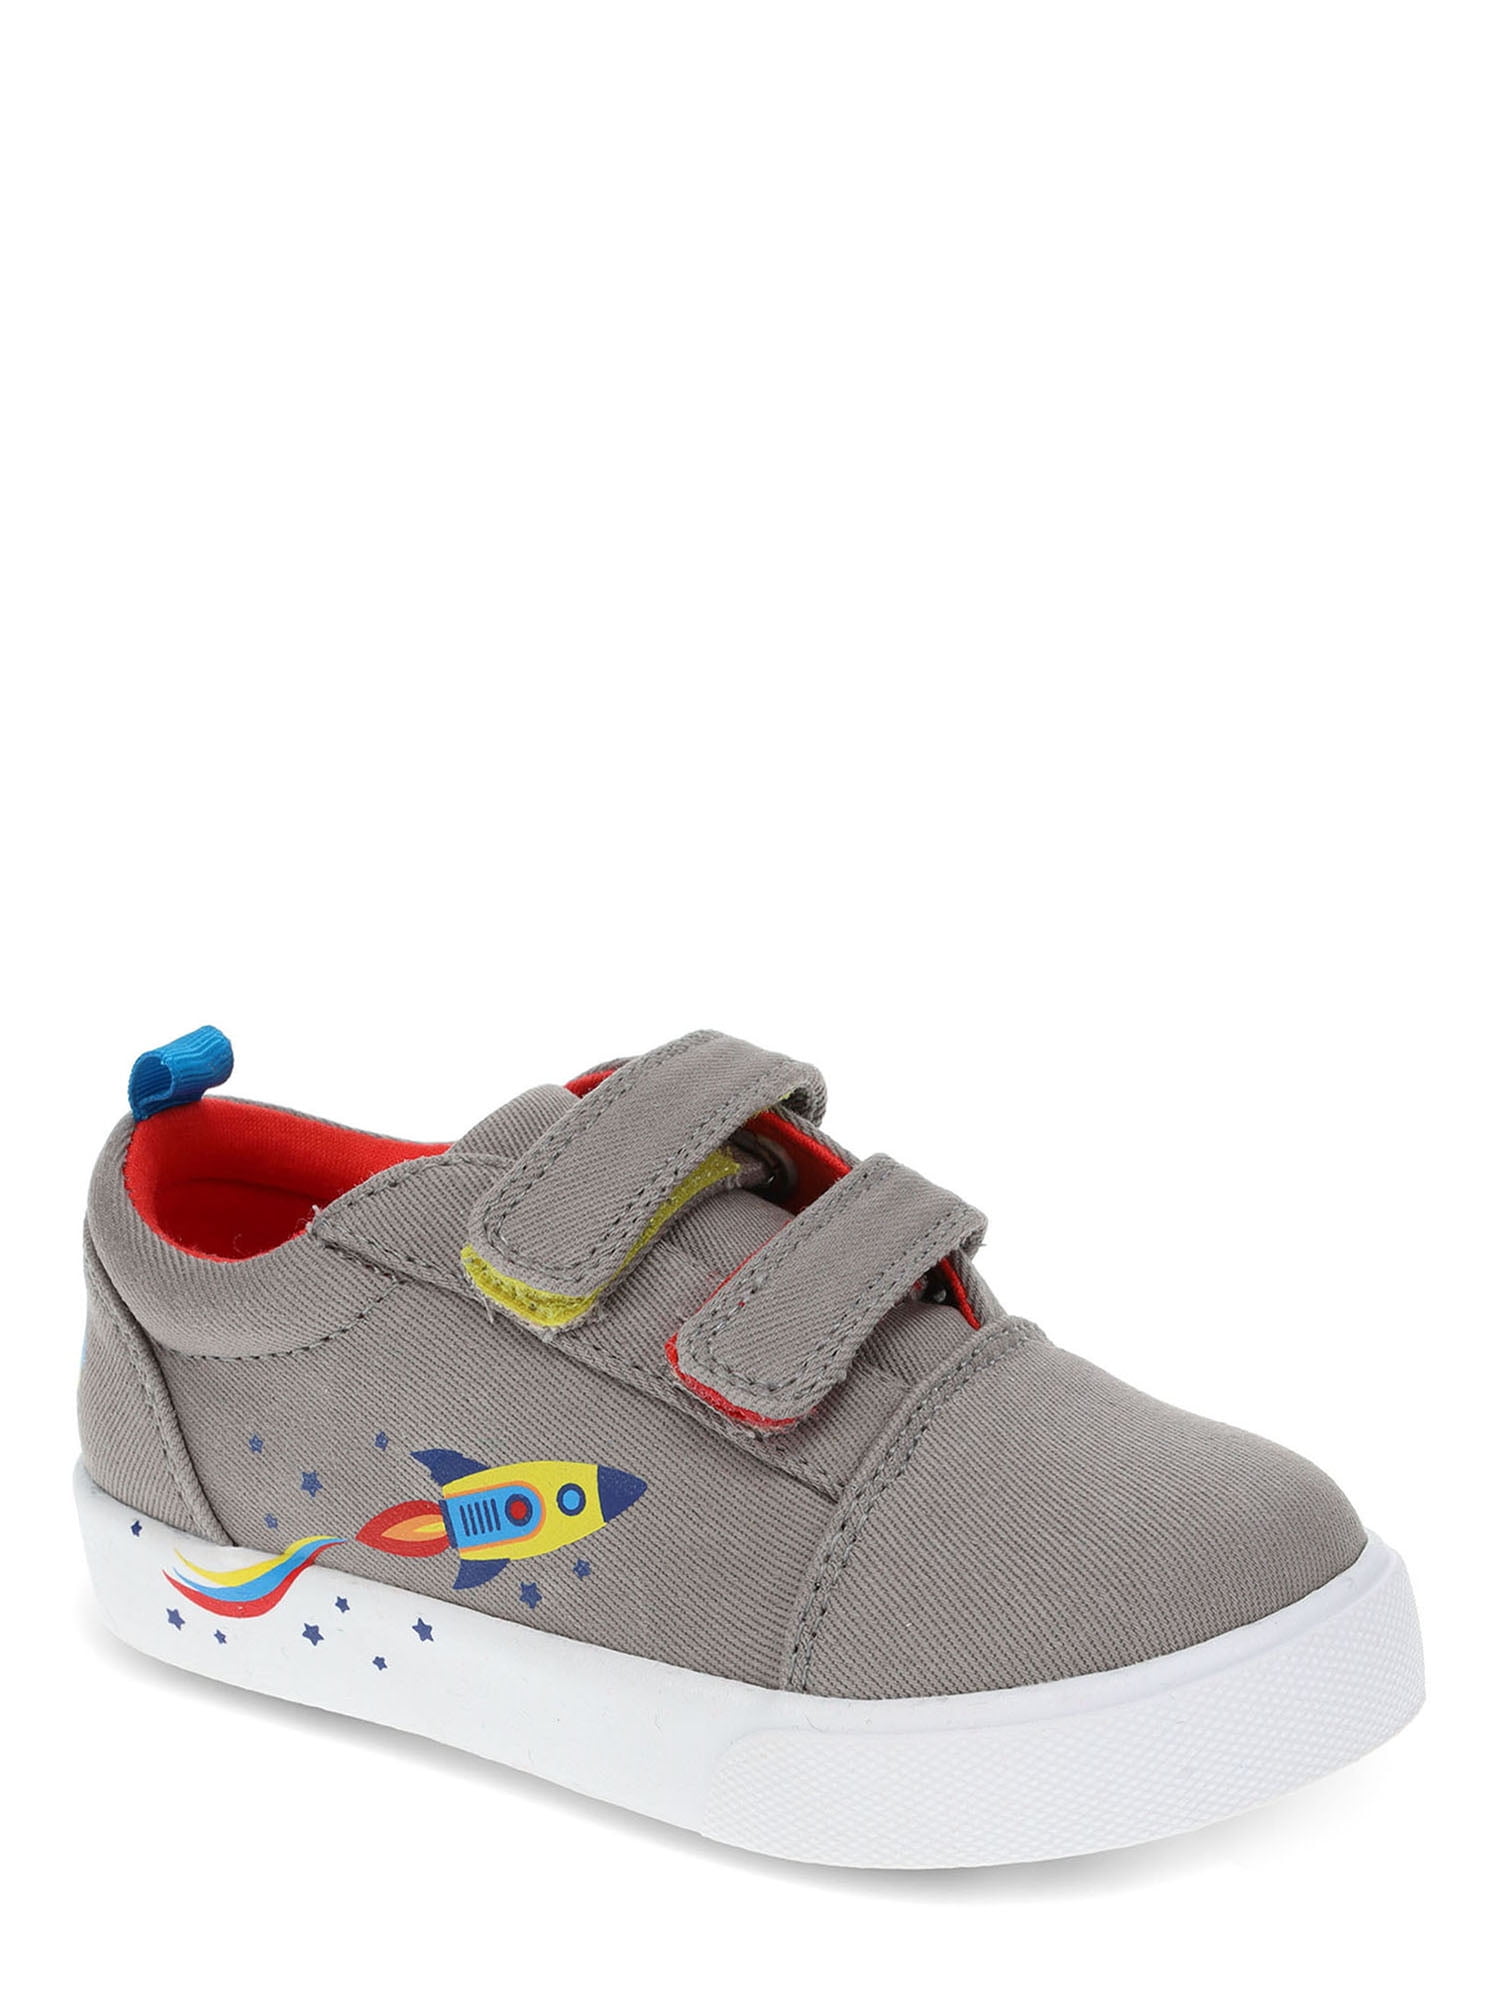 Wonder Nation Toddler Boys Space Shoes, Sizes 7-12